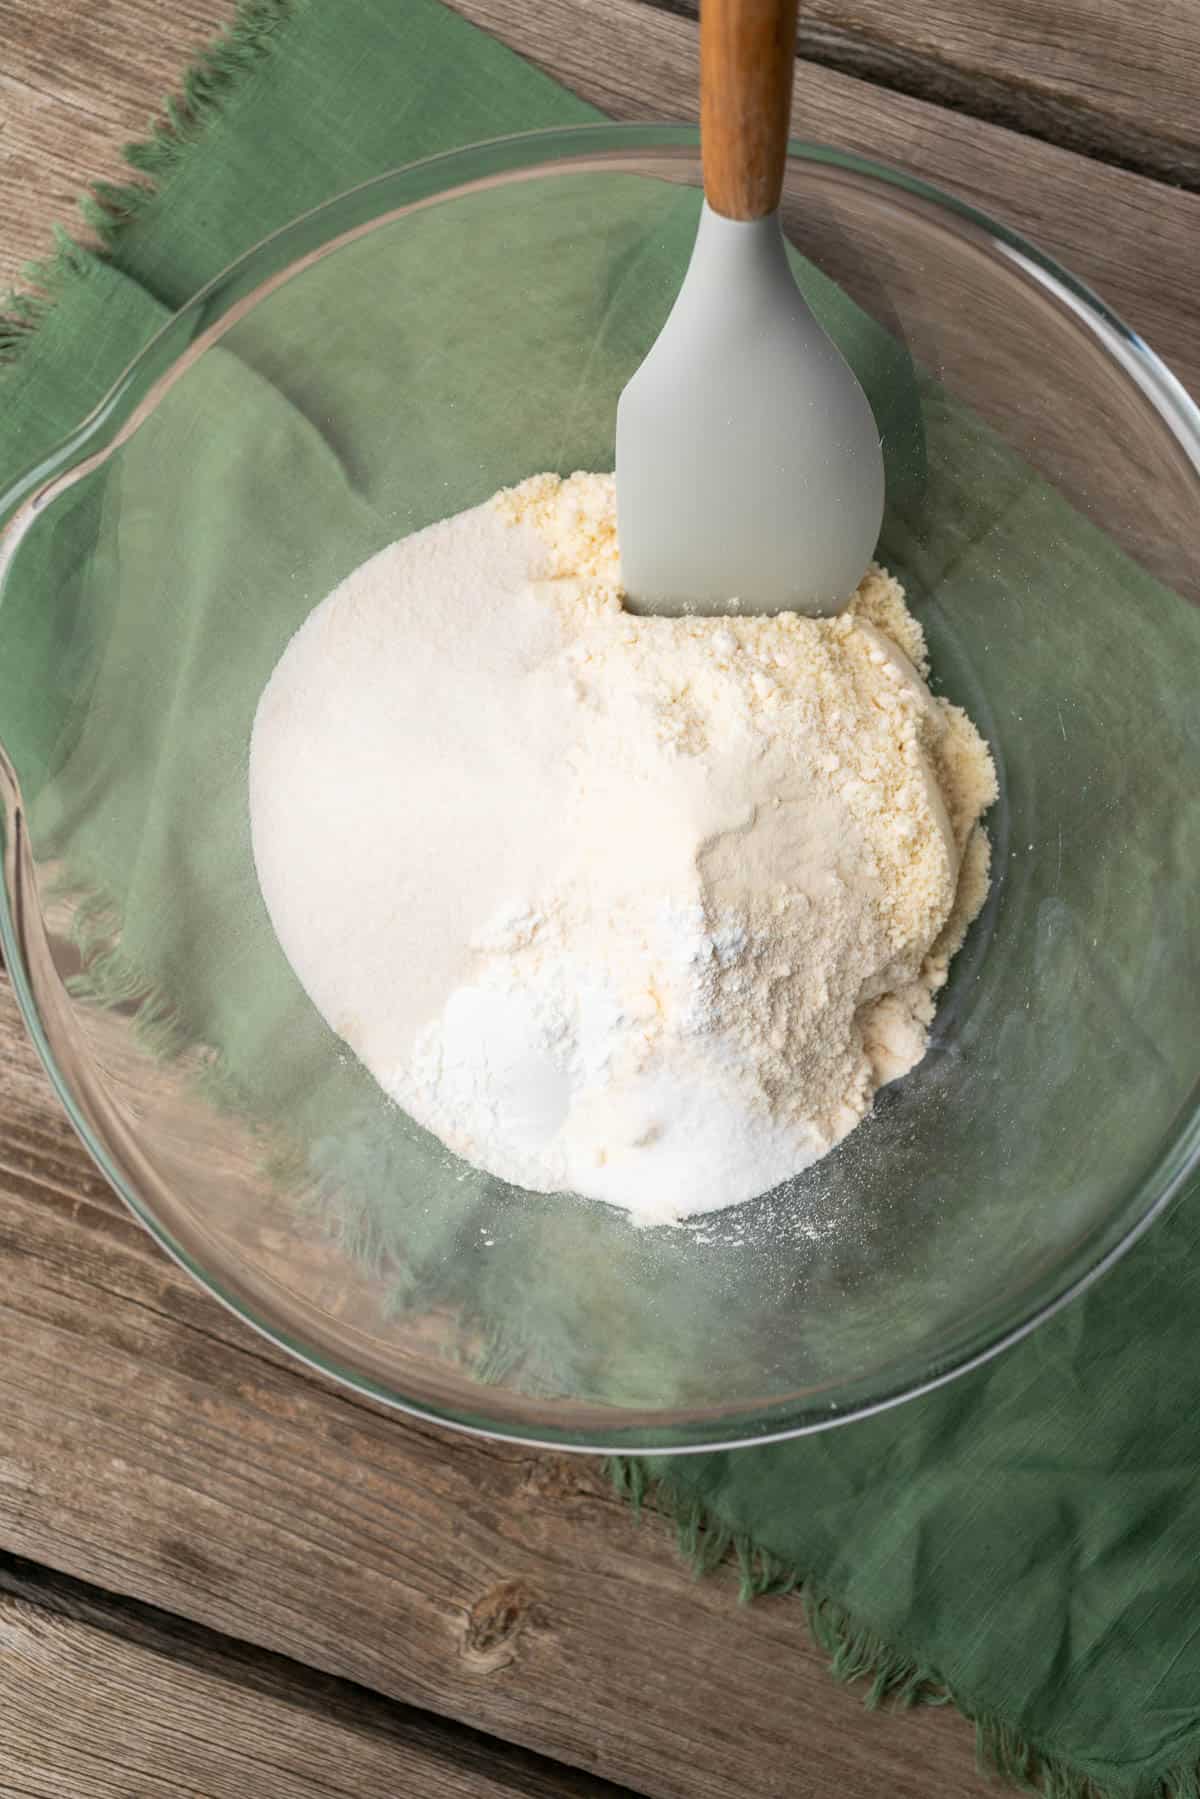 dry keto cornbread ingredients in a glass bowl with a green napkin underneath